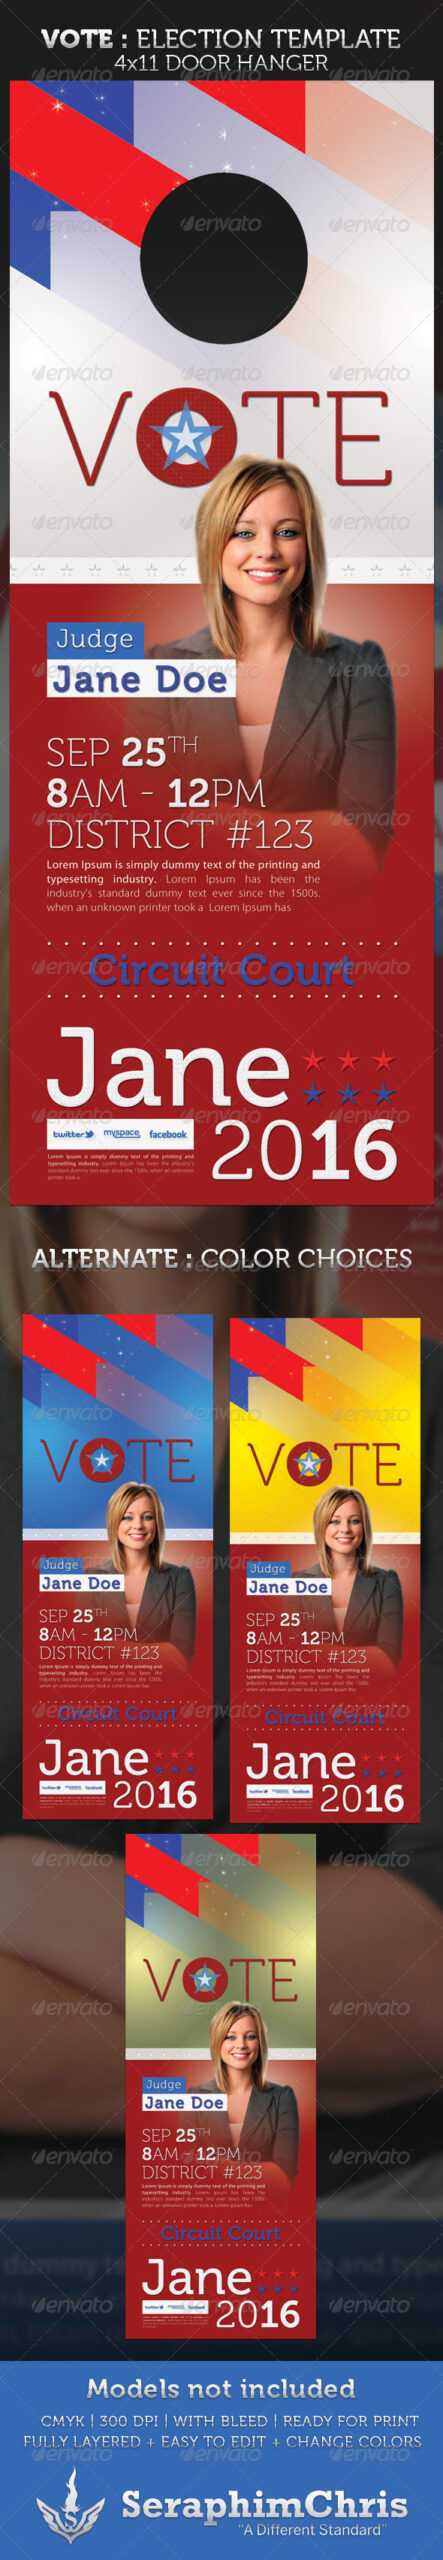 Election Poster Template Graphics, Designs & Templates With Regard To Election Templates Flyers